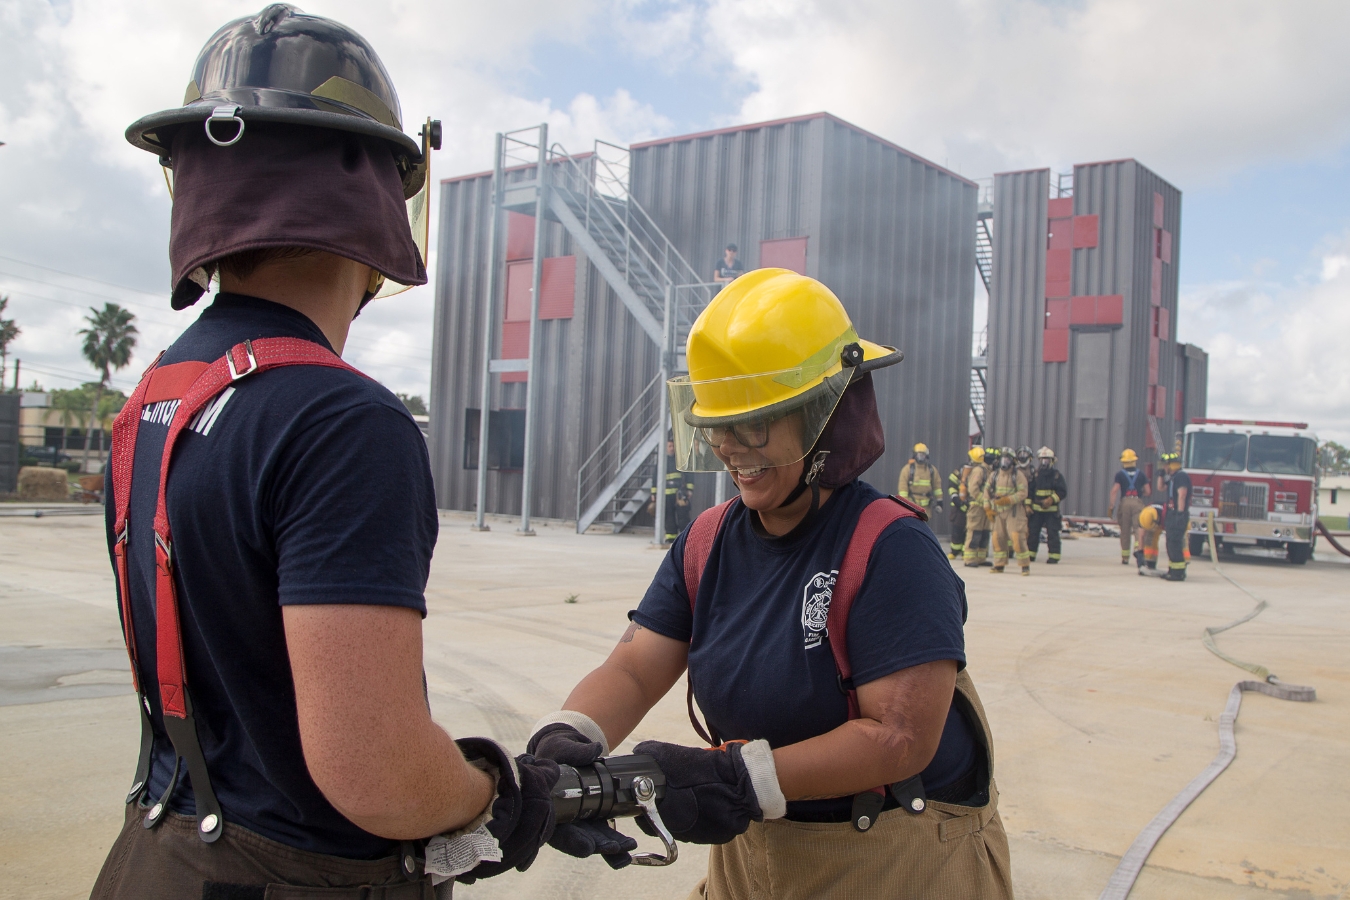 Two firefighter/ fire science students participating in a hands-on exercise at EFSC's fire science academy training facility